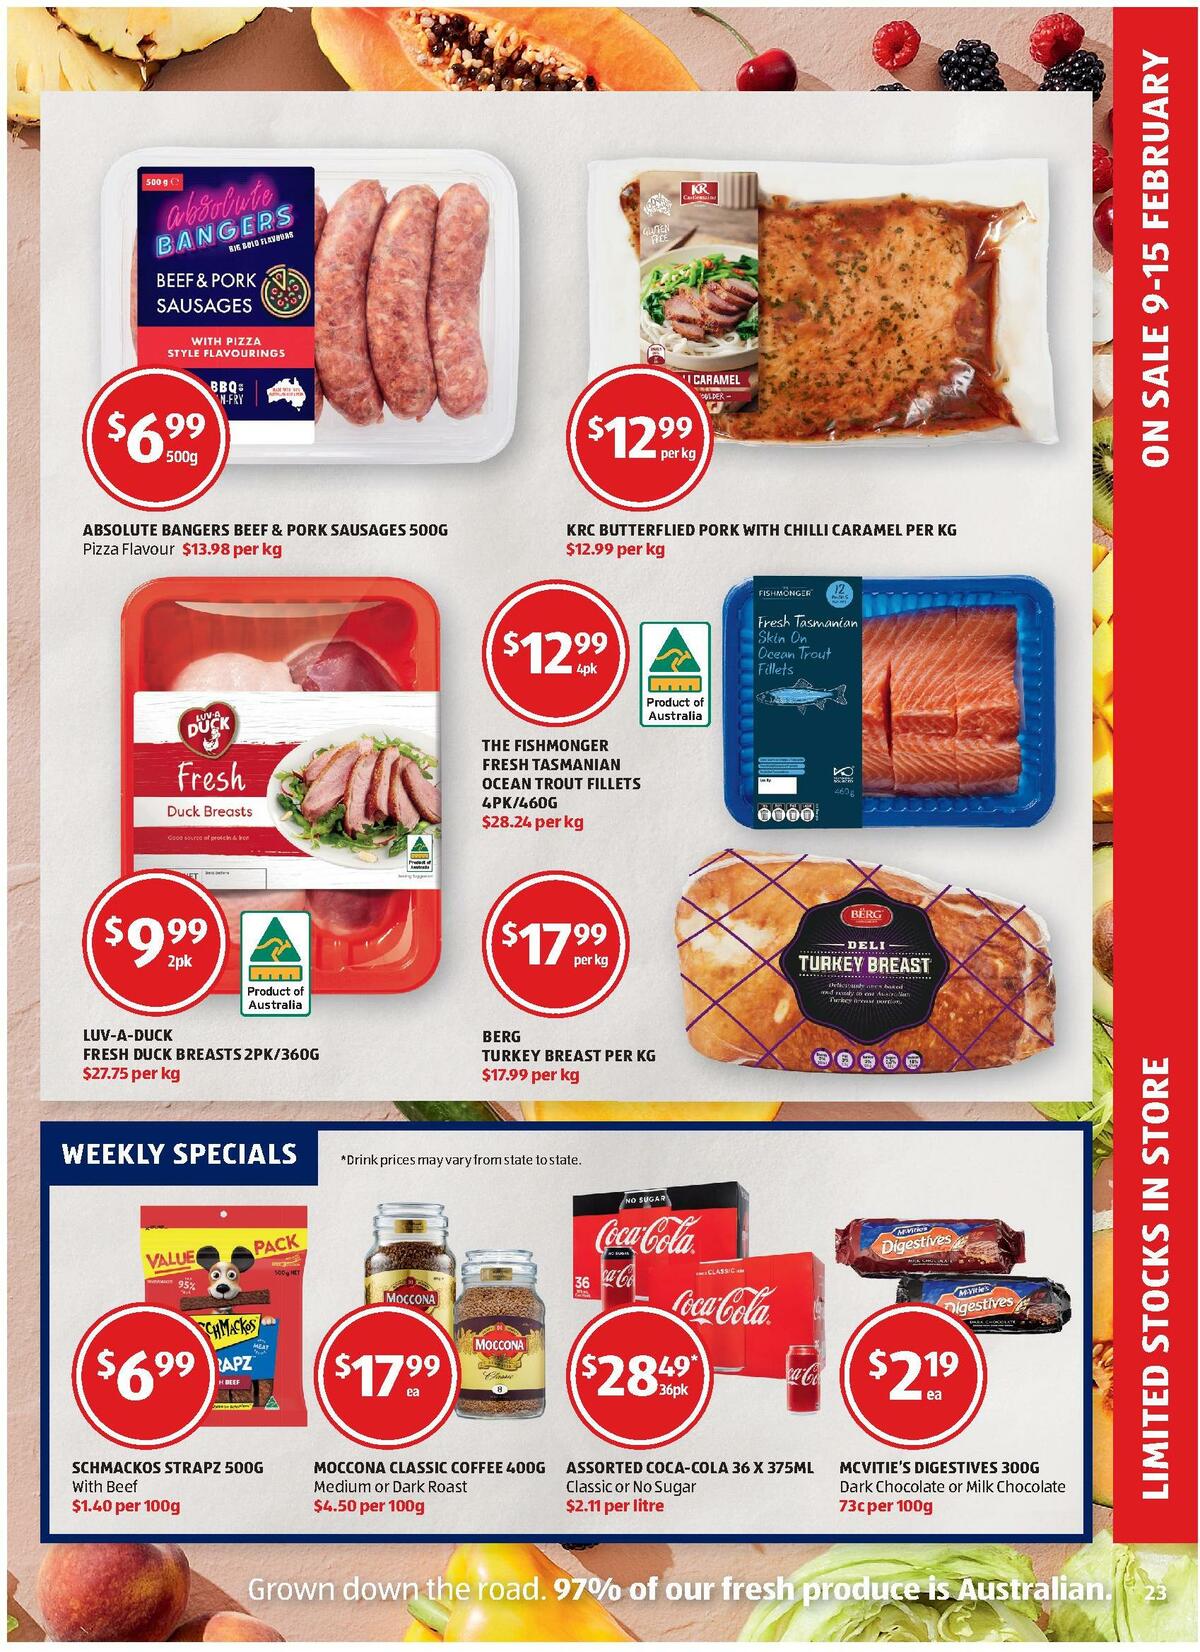 ALDI Catalogues from 16 February